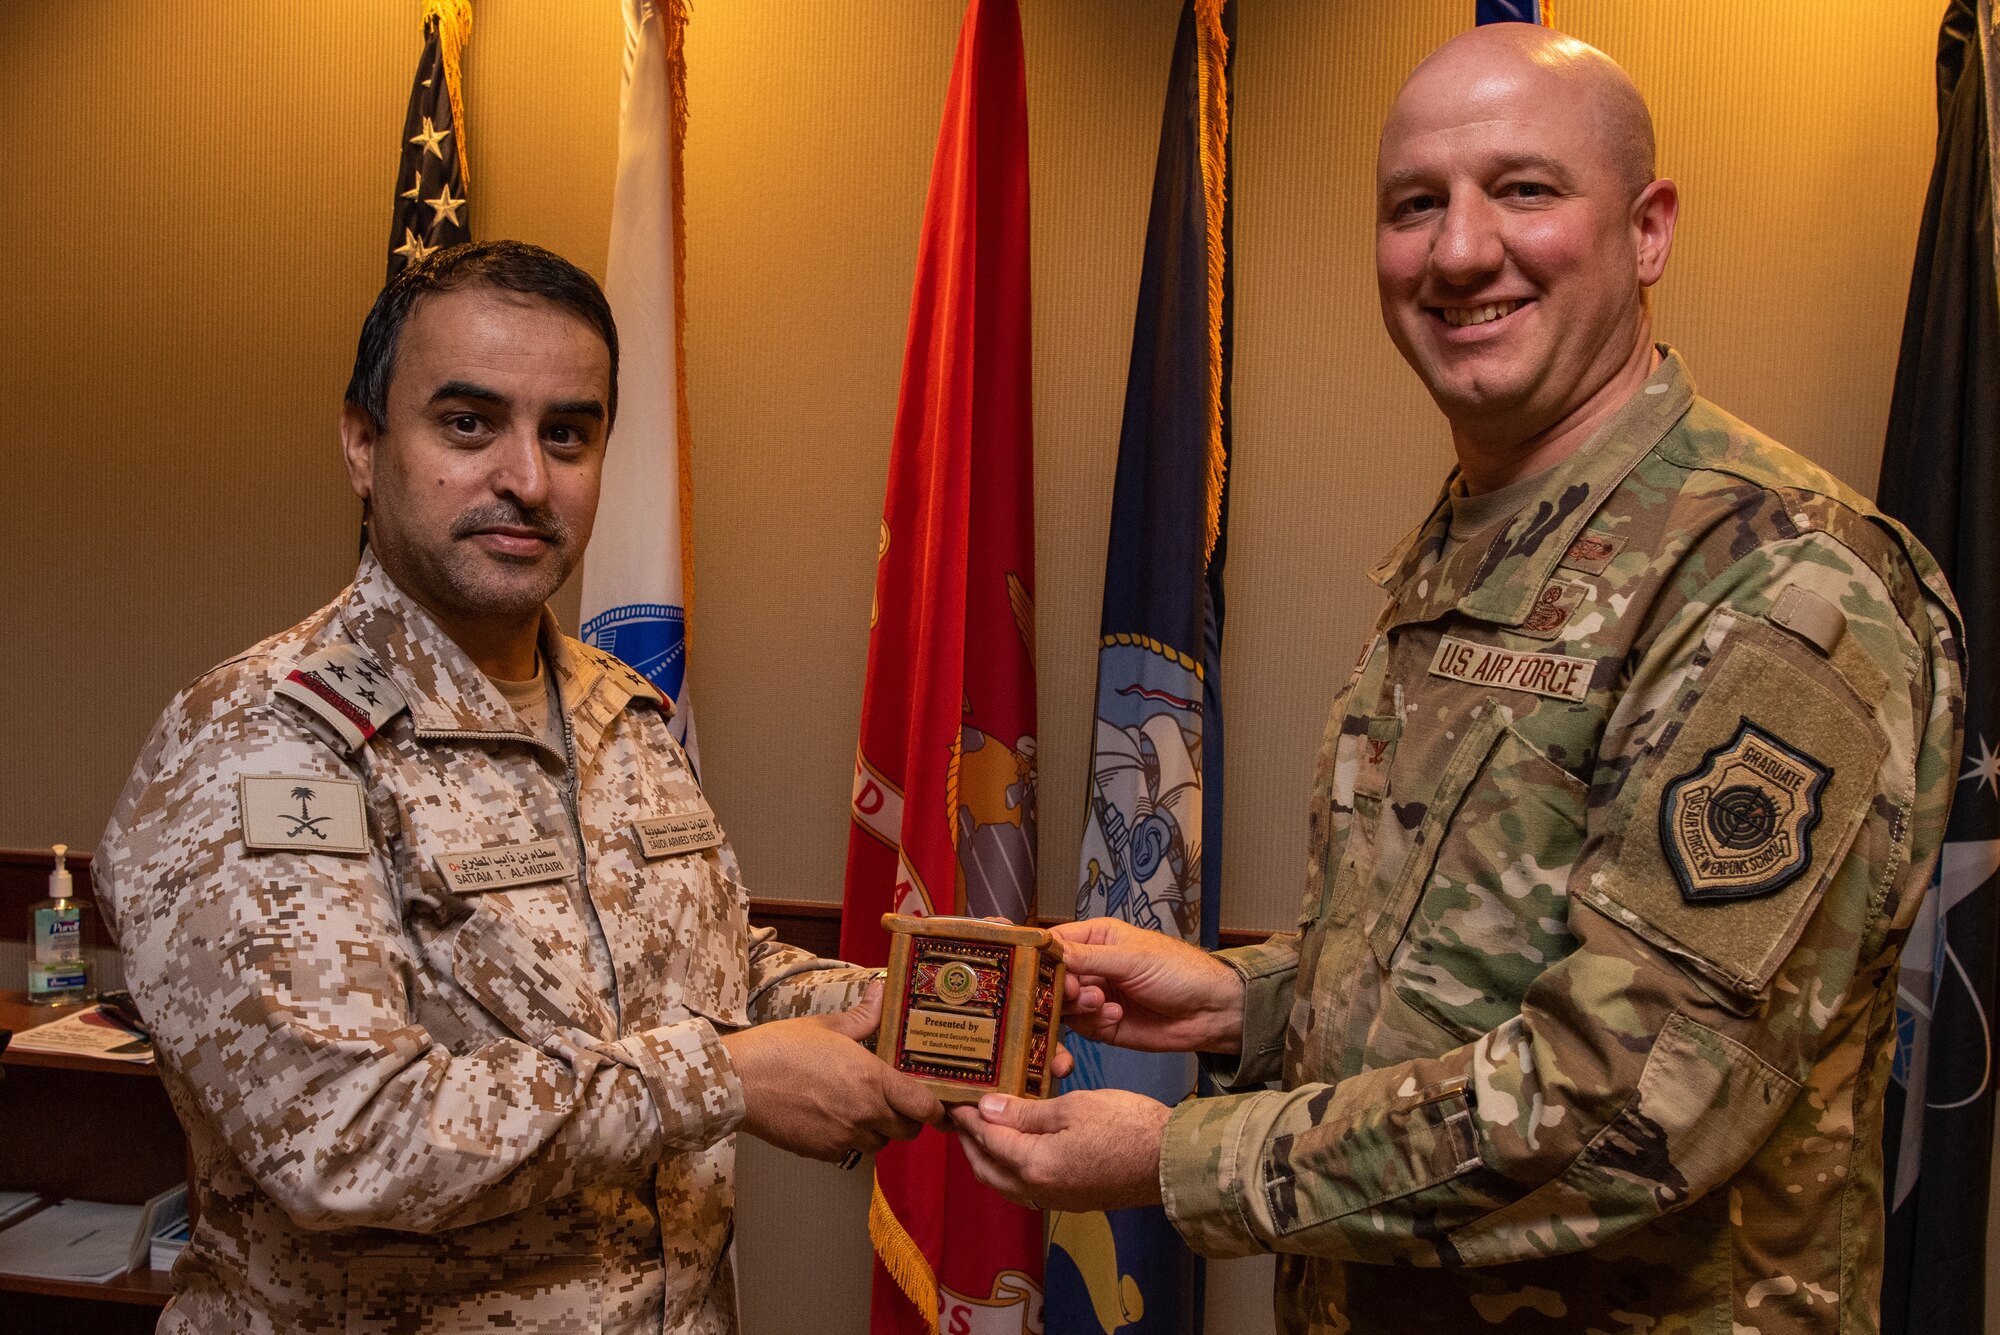 Royal Saudi Air Forces Commodore Al Mutairi Sattam Thaib, Armed Forces Intel and Security Institute commander, presents a gift to U.S. Air Force Col. Matthew Reilman, 17th Training Wing commander, Goodfellow Air Force Base, May 18, 2022. Members of the RSAF visited Goodfellow AFB to learn about the joint and coalition forces intelligence, surveillance, and reconnaissance training provided by the 17th TRW. (U.S. Air Force Photo by Senior Airman Michael Bowman)